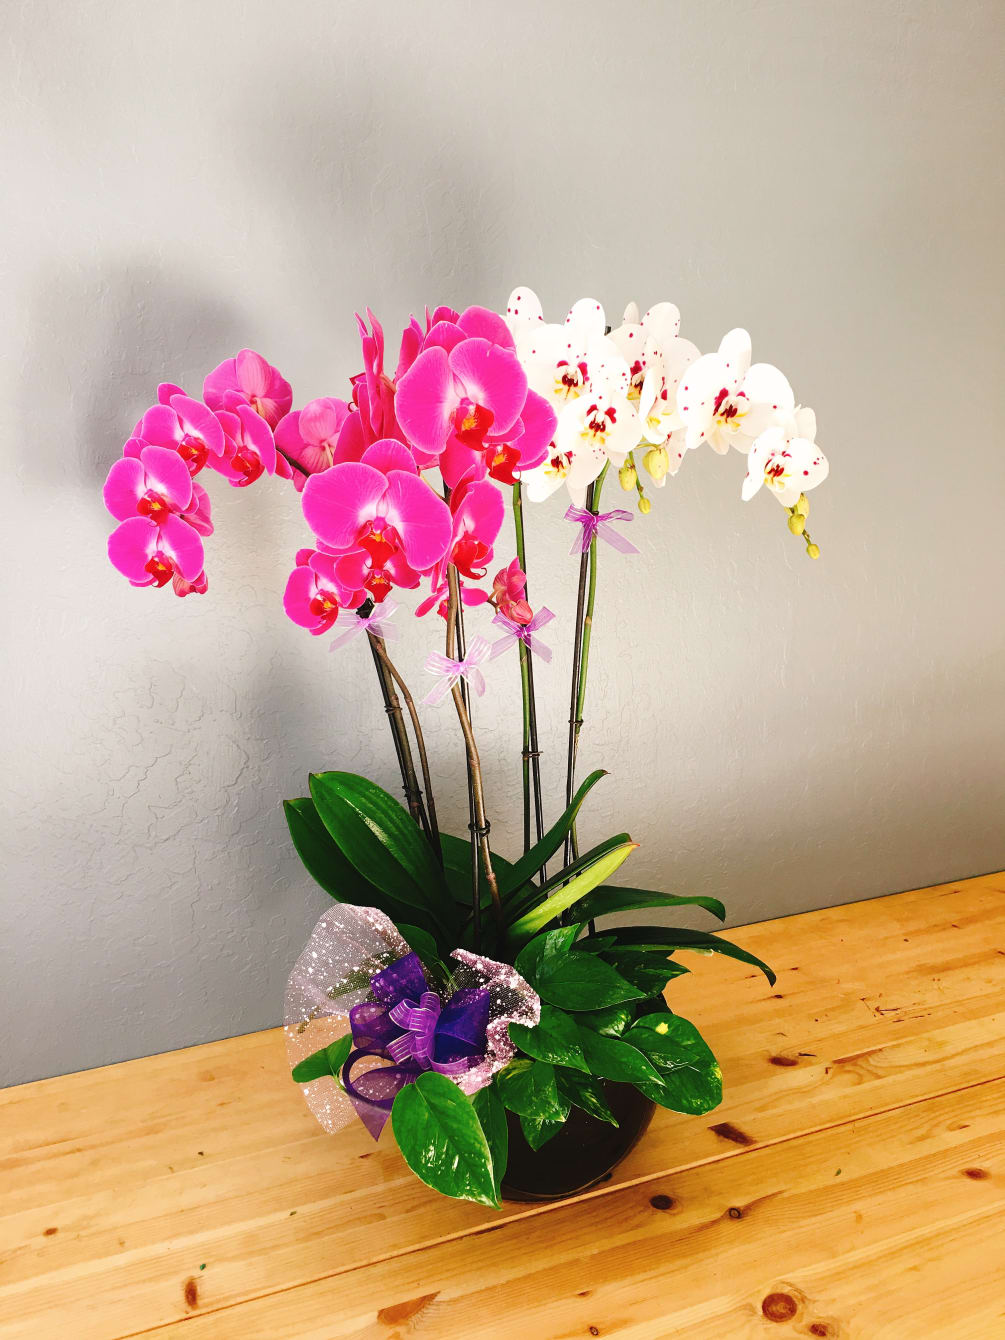 This world-class orchid creates an elegant focal point for the home or